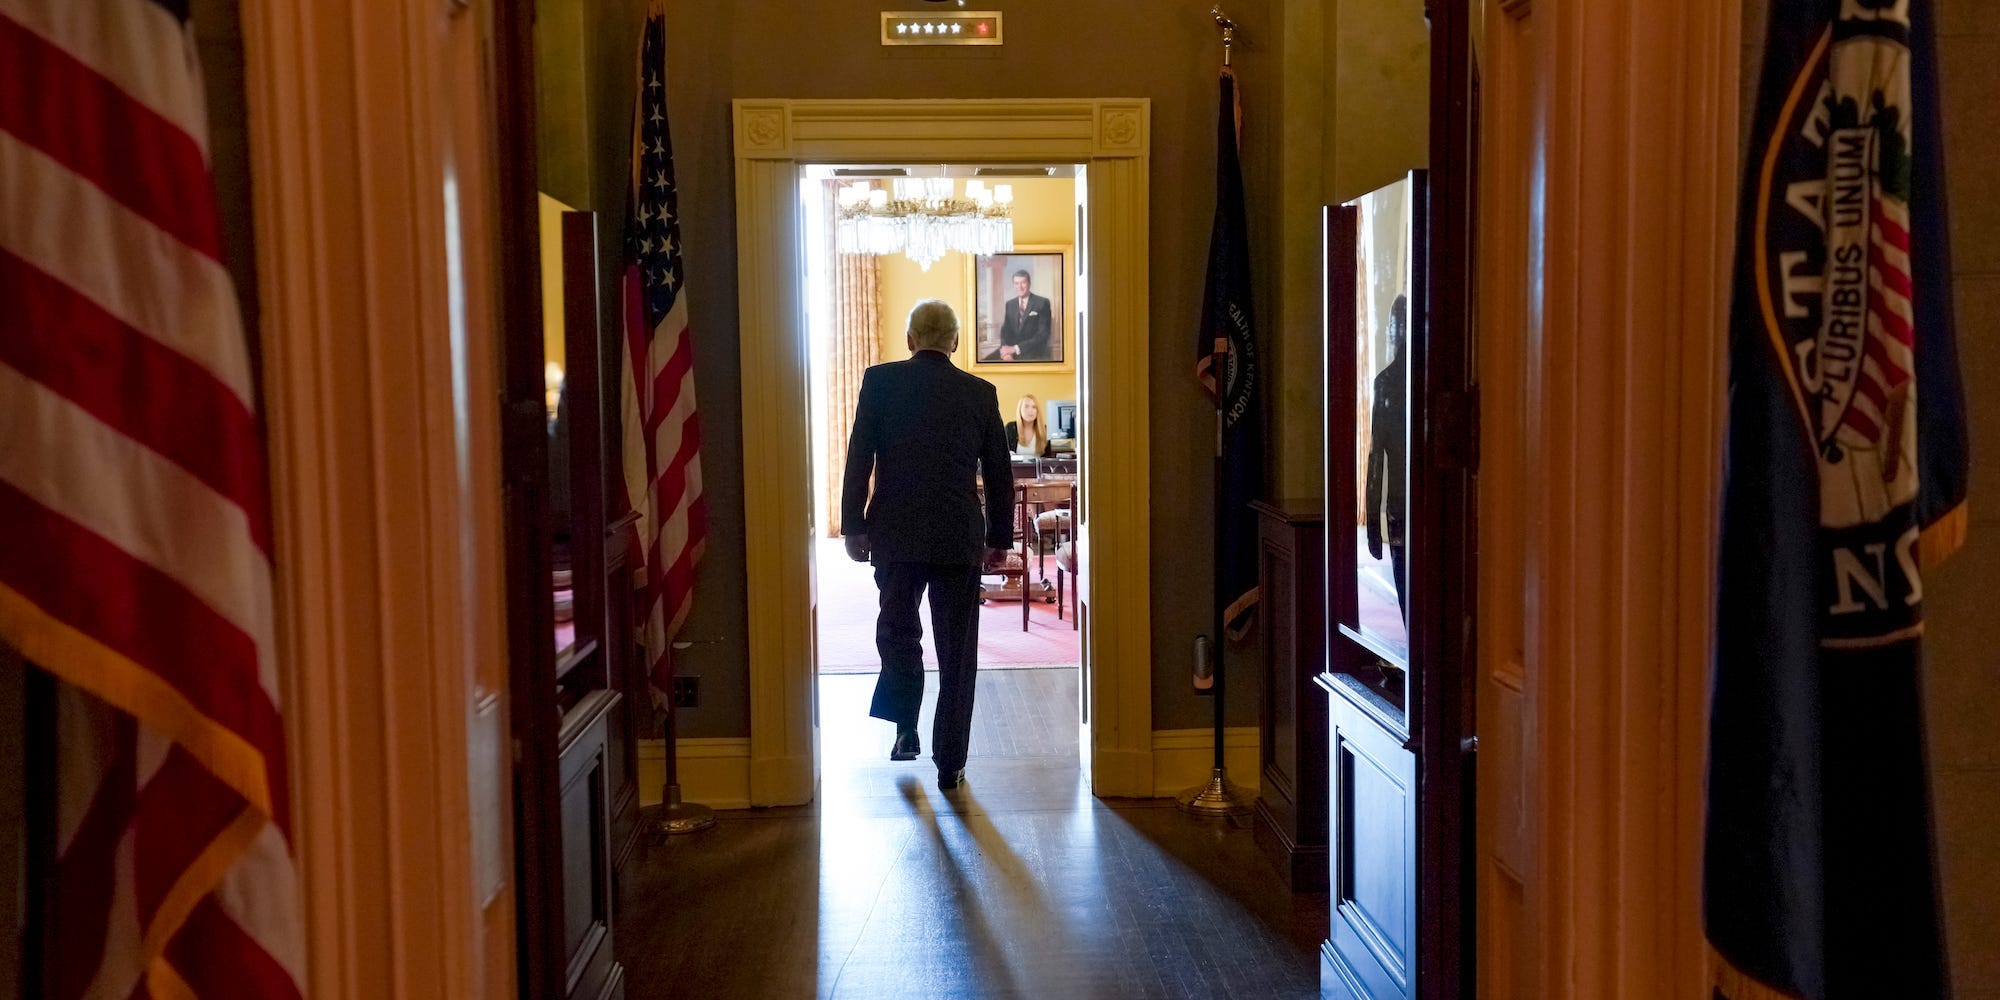 Senate Minority Leader Mitch McConnell walks into his office at the US Capitol on May 27, 2021 after expressing opposition to a January 6 commission.